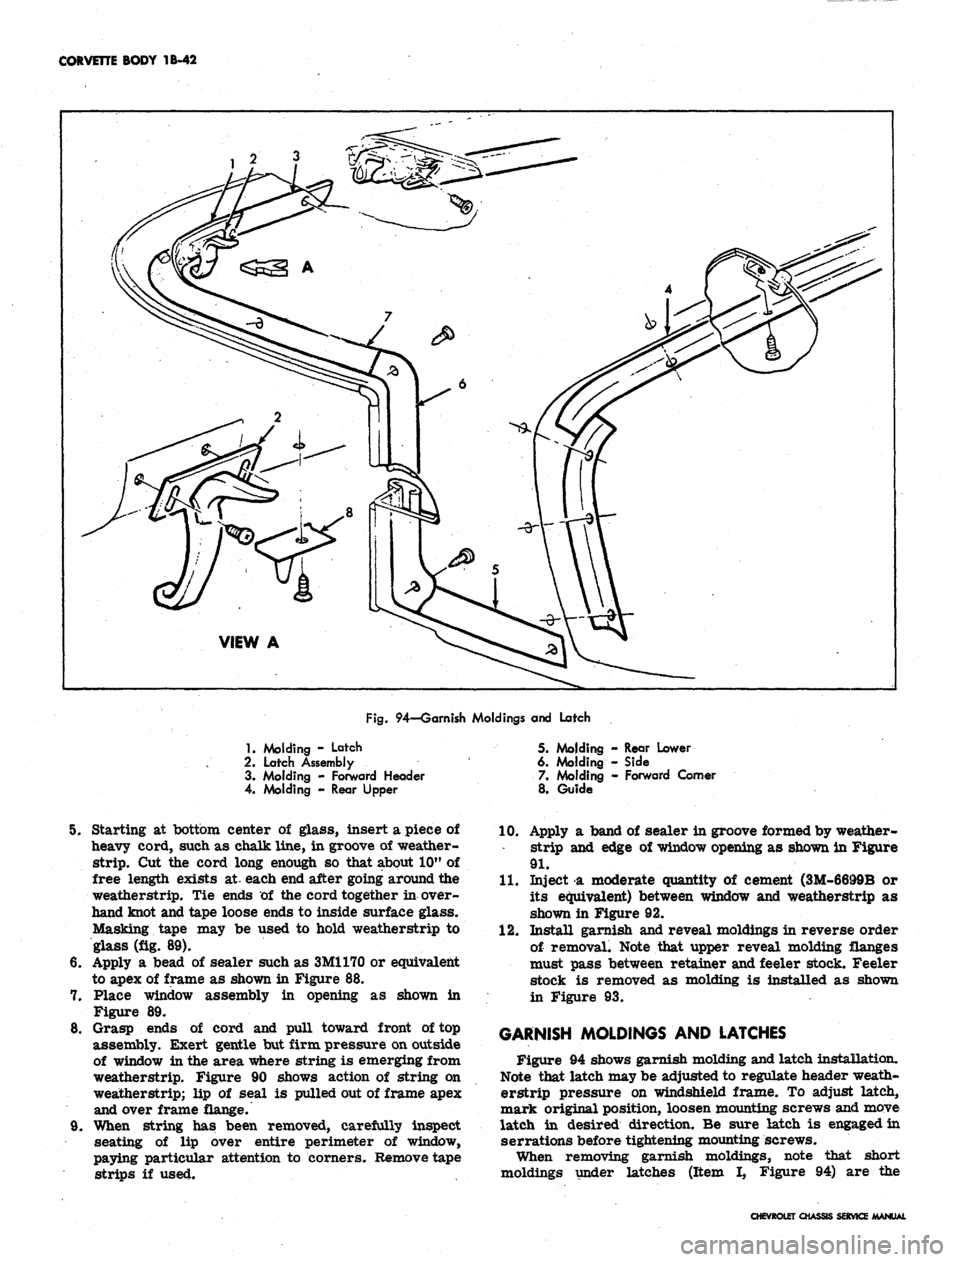 CHEVROLET CAMARO 1967 1.G Chassis Workshop Manual 
CORVETTE BODY 1B-42

Fig.
 94—Garnish Moldings and Latch

1.
 Molding - Latch

2.
 Latch Assembly

3. Molding - Forward Header

4. Molding - Rear Upper 
5. Molding - Rear Lower

6. Molding - Side

